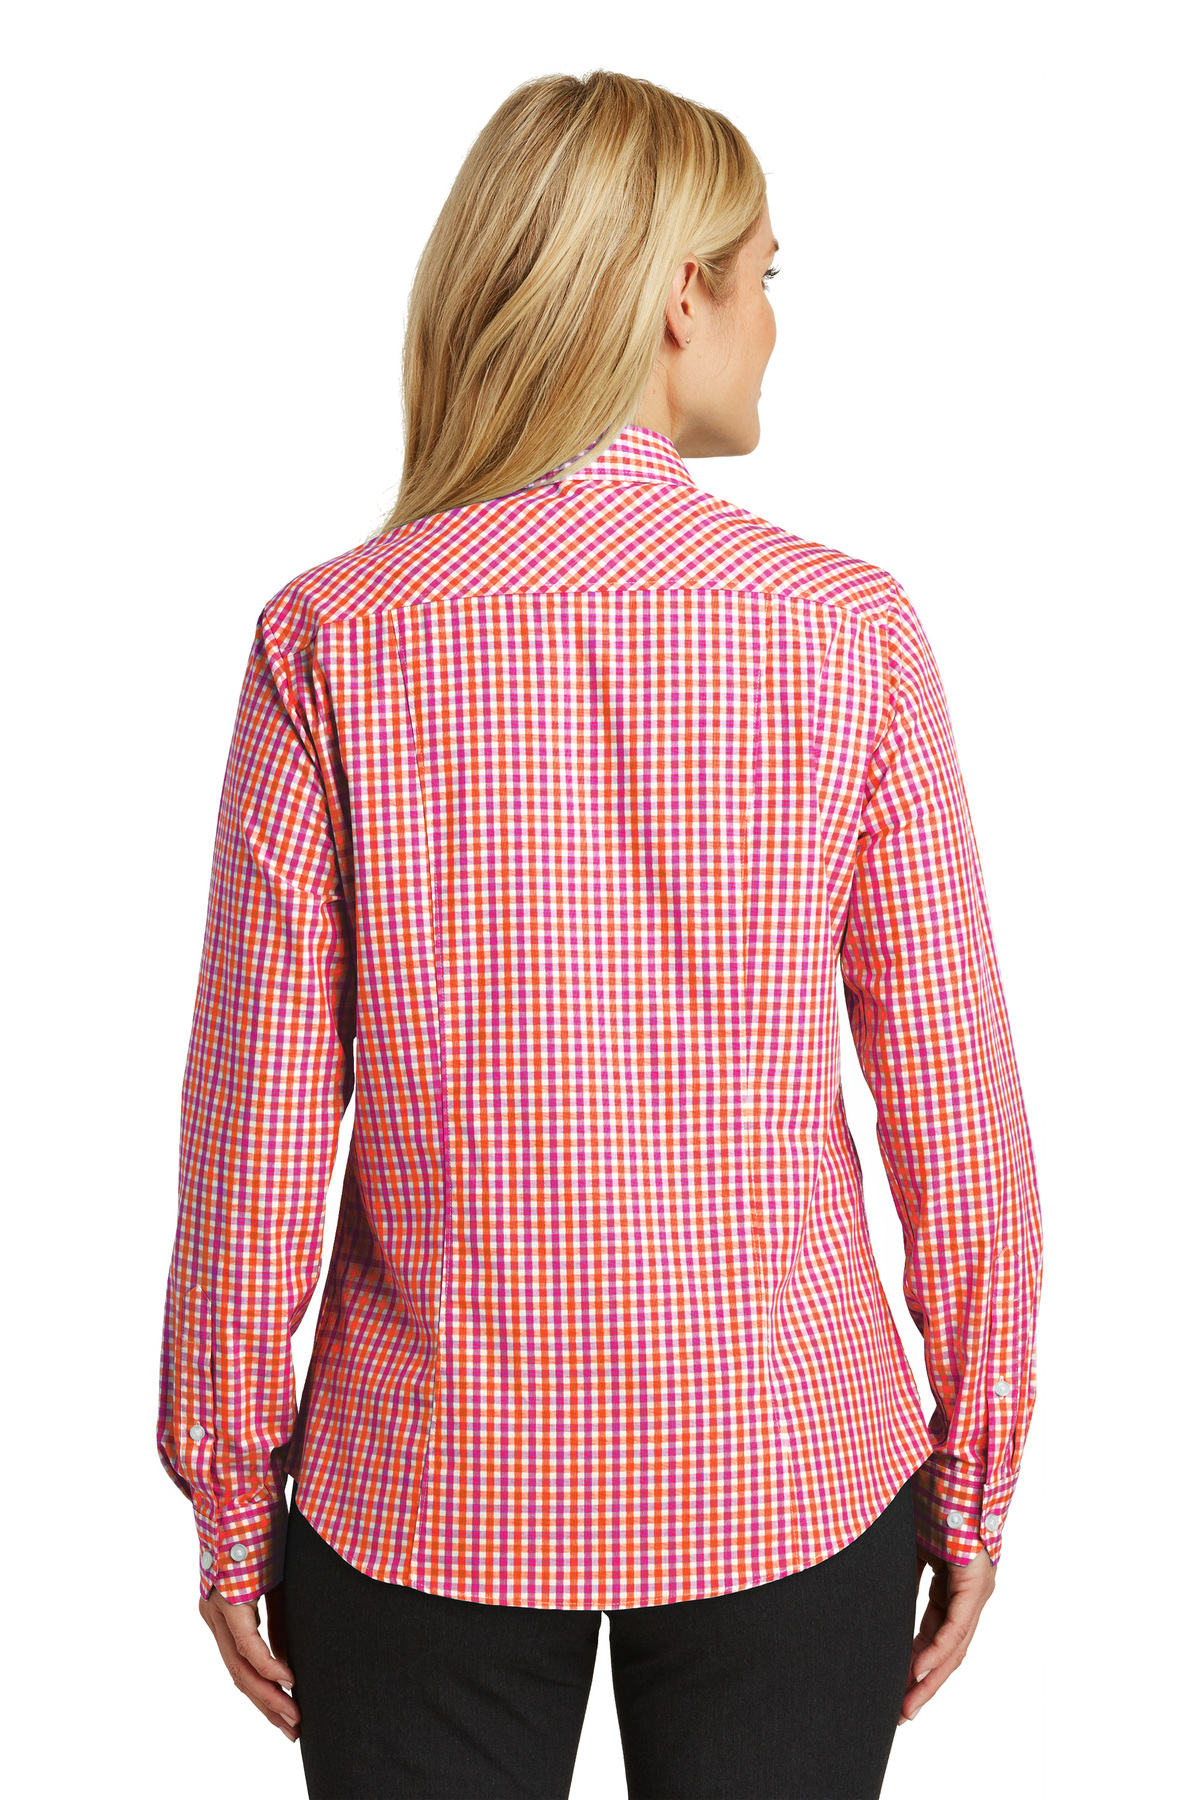 Port Authority Ladies Long Sleeve Gingham Easy Care Shirt | Product ...